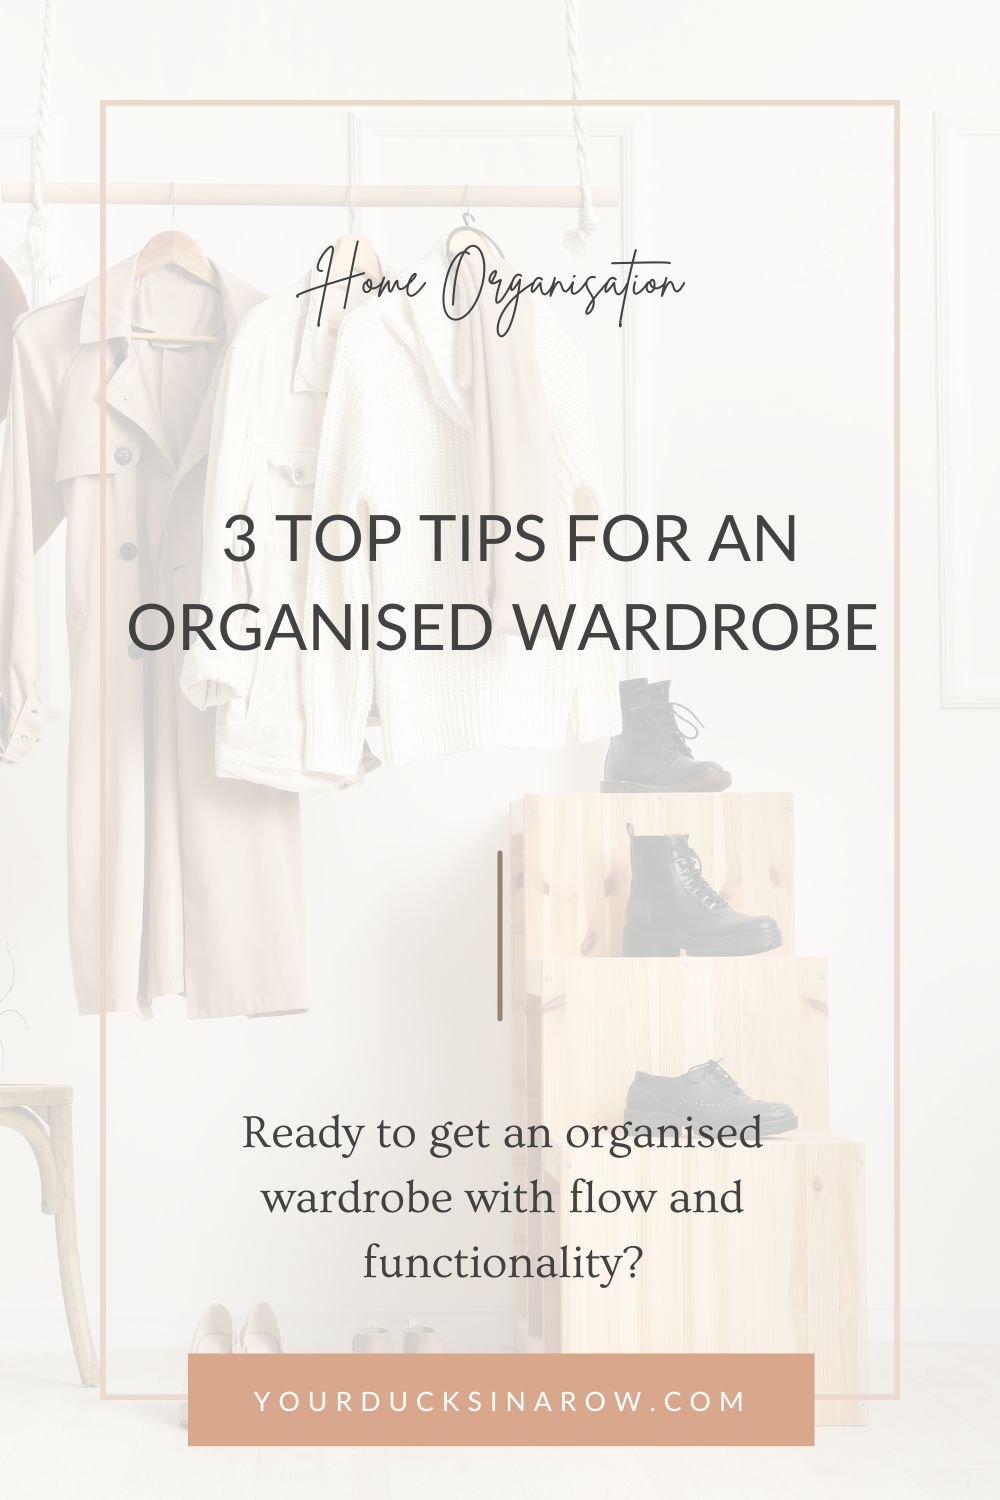 Top Tips for an Organised Wardrobe